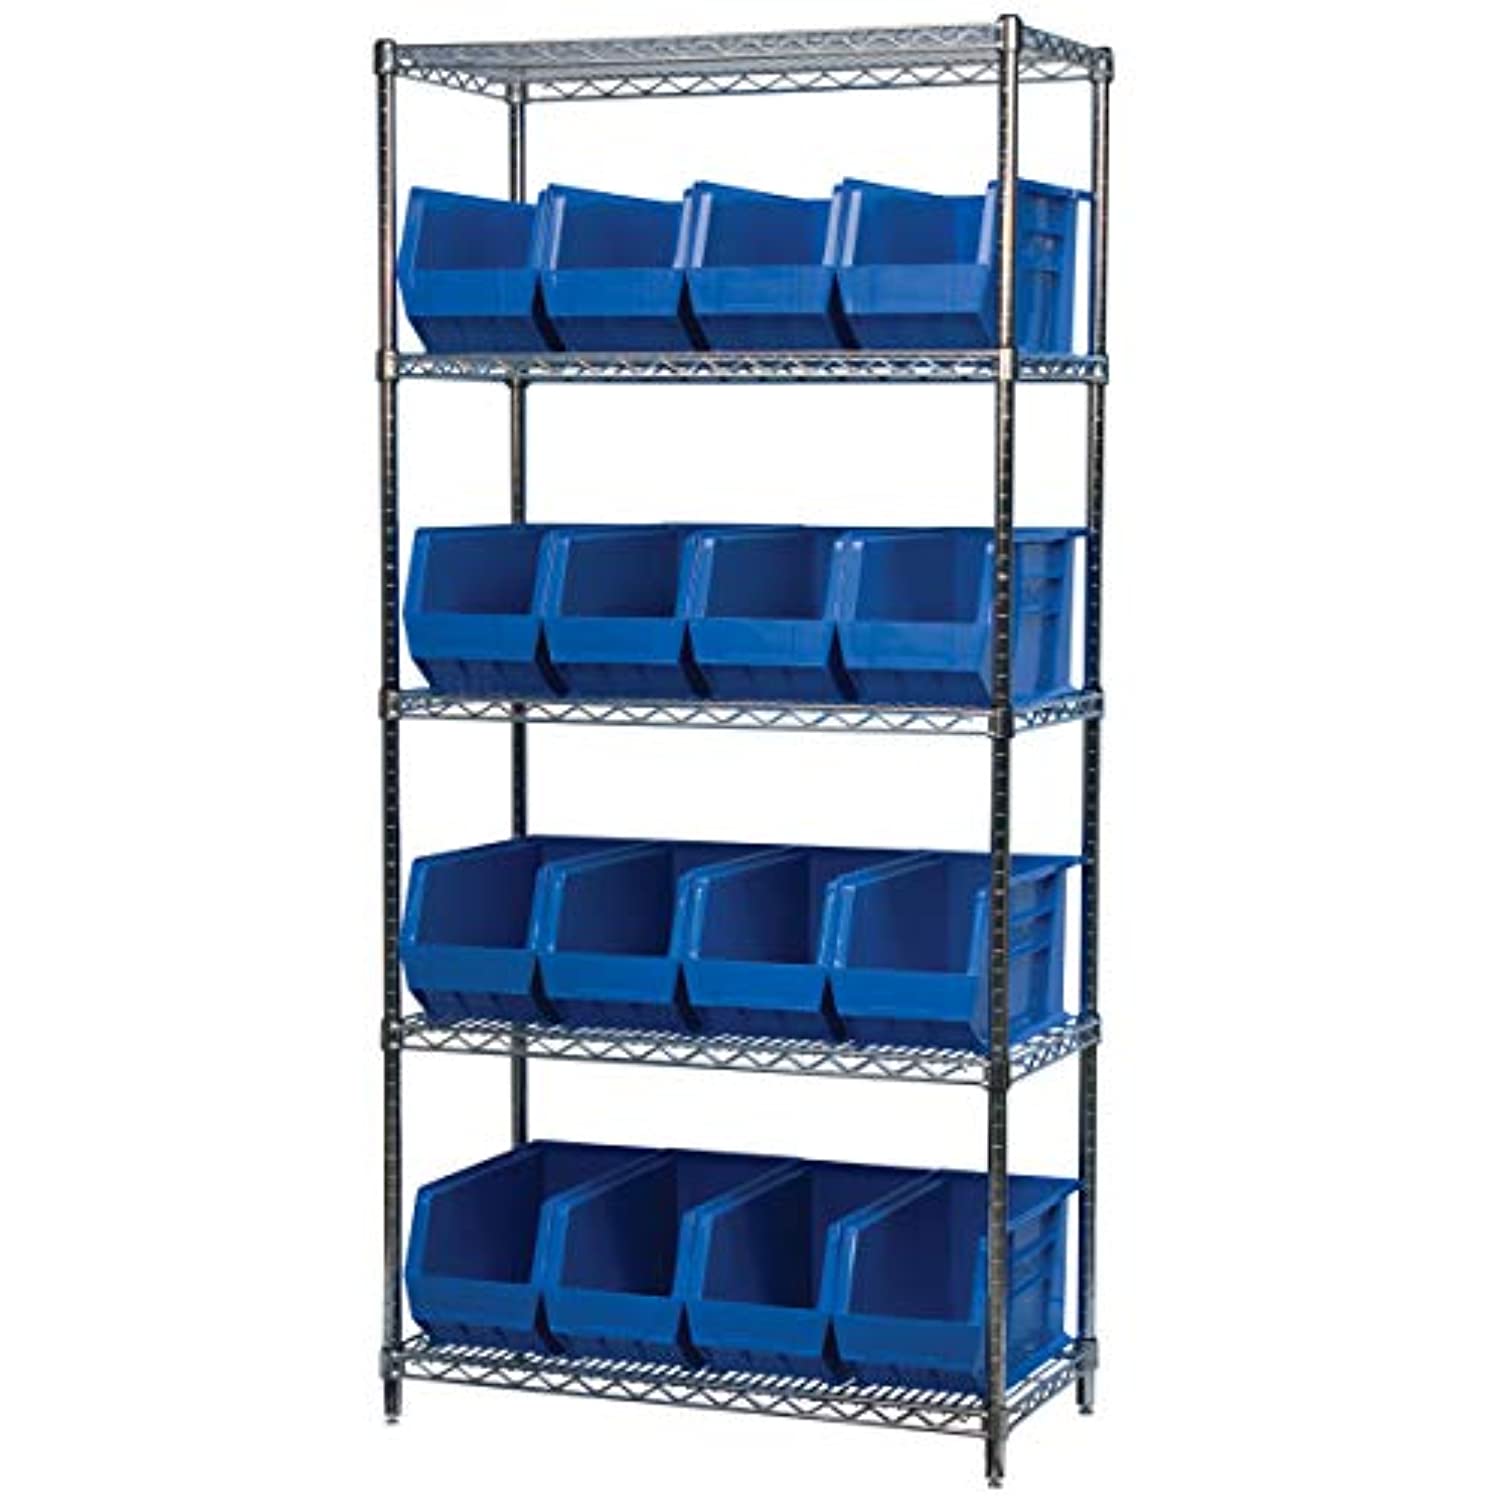 akro-mils 30265 plastic storage stacking hanging akro bin, 18-inch by 8-inch by 9-inch, blue, case of 6 - image 3 of 6